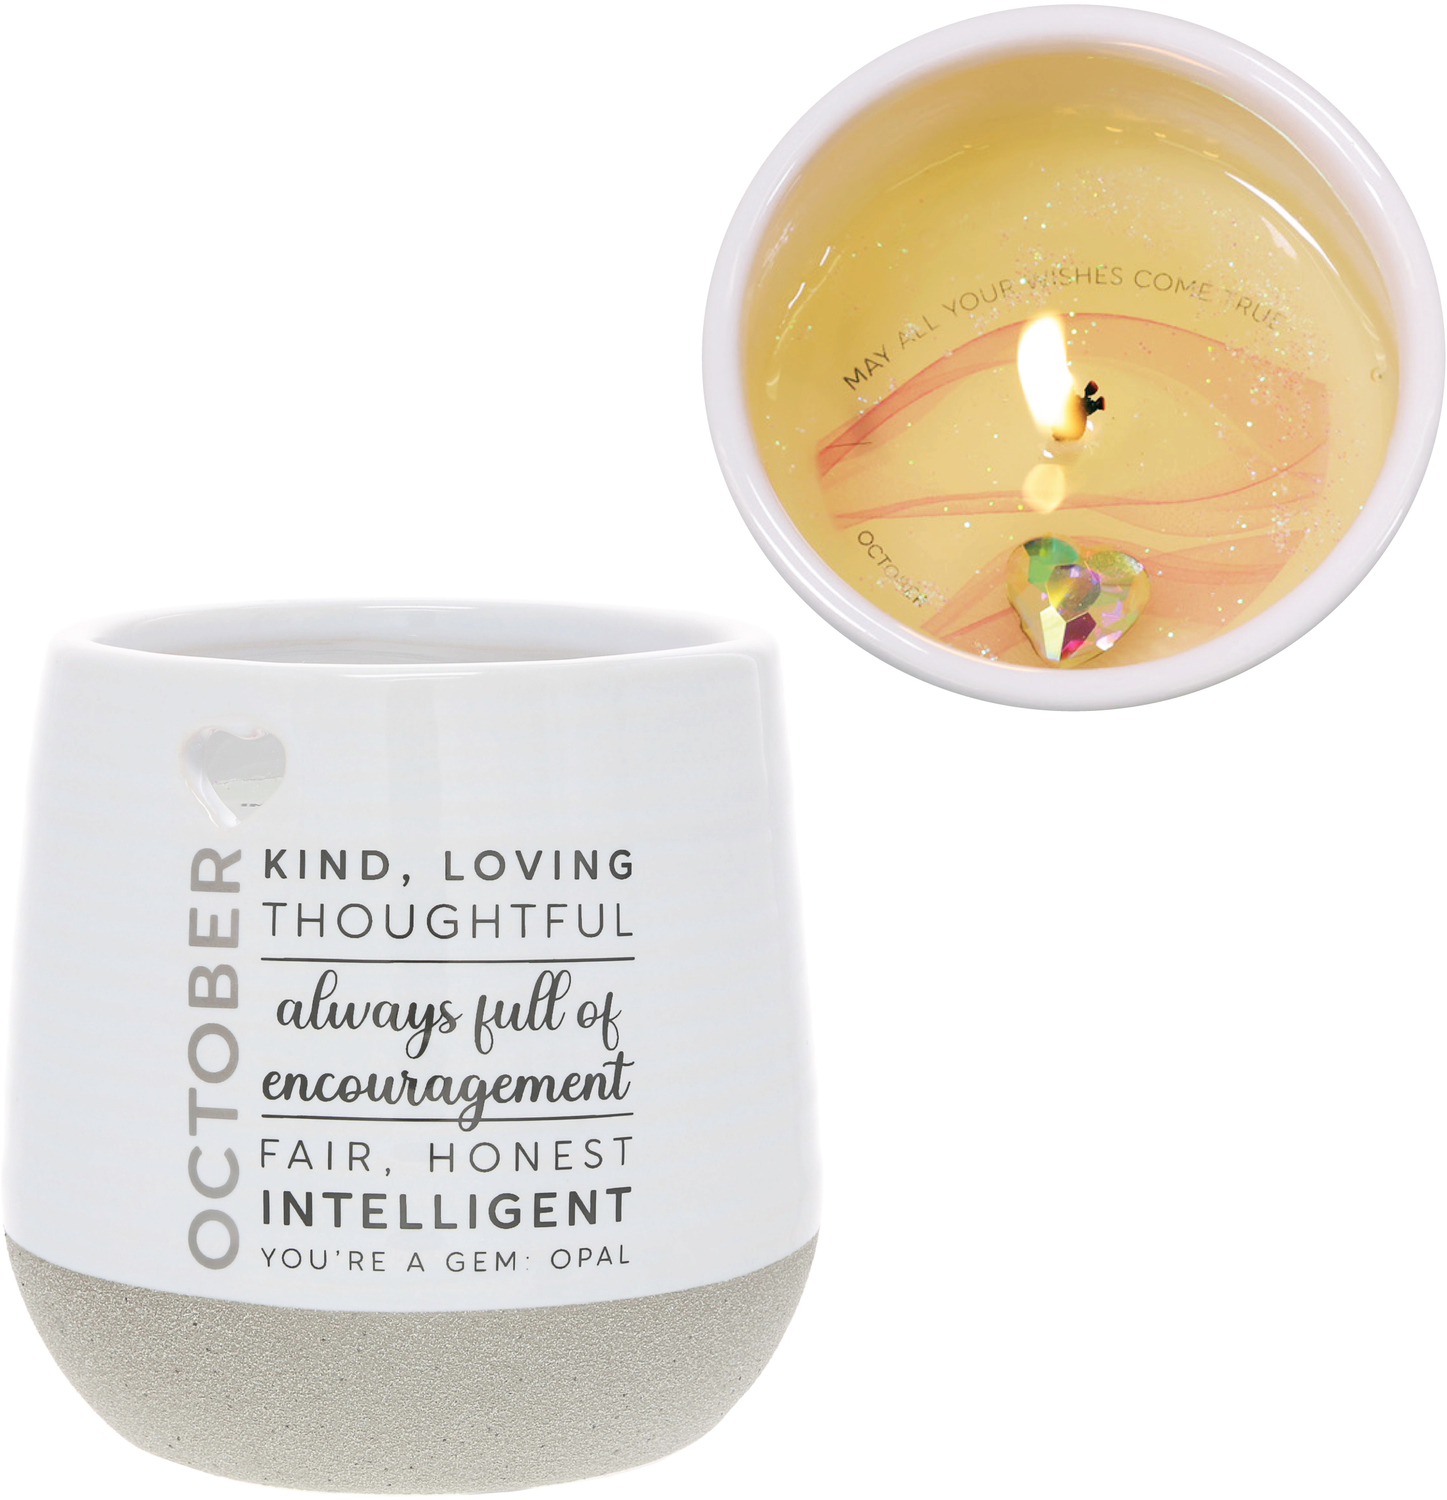 October by You Are a Gem - October - 11 oz - 100% Soy Wax Reveal Candle with Birthstone Scent: Tranquility